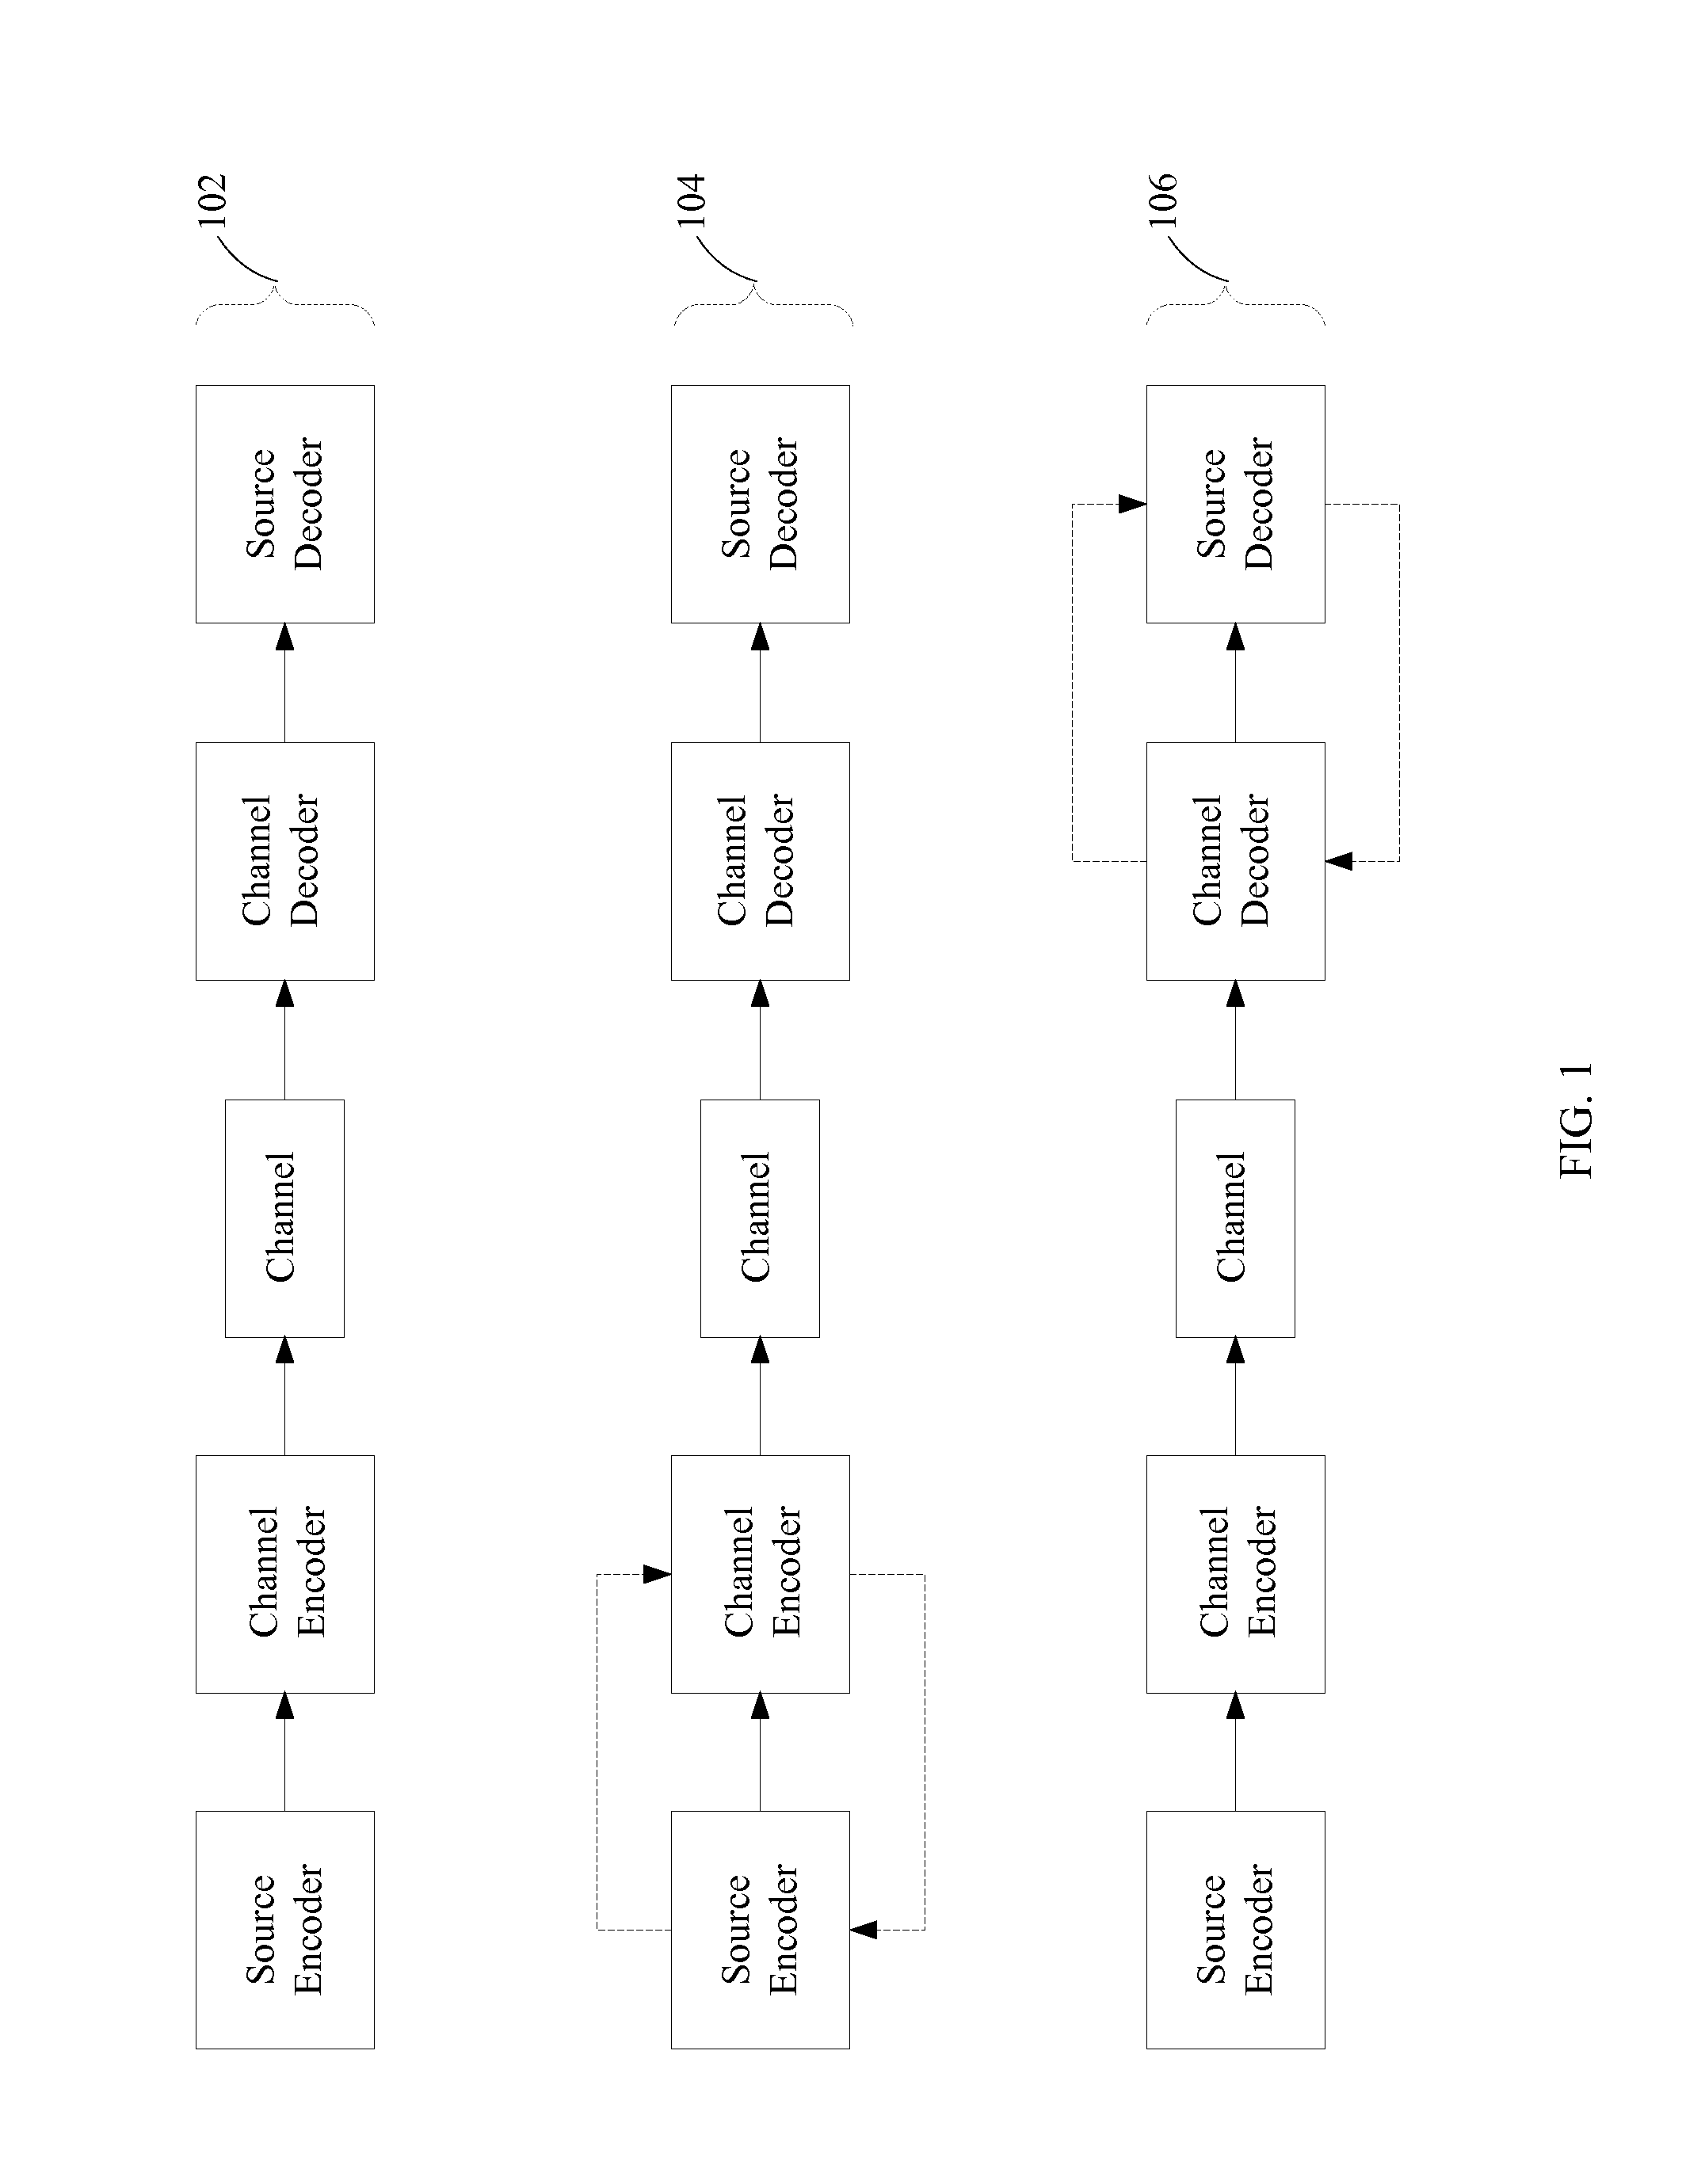 Modem architecture for joint source channel decoding